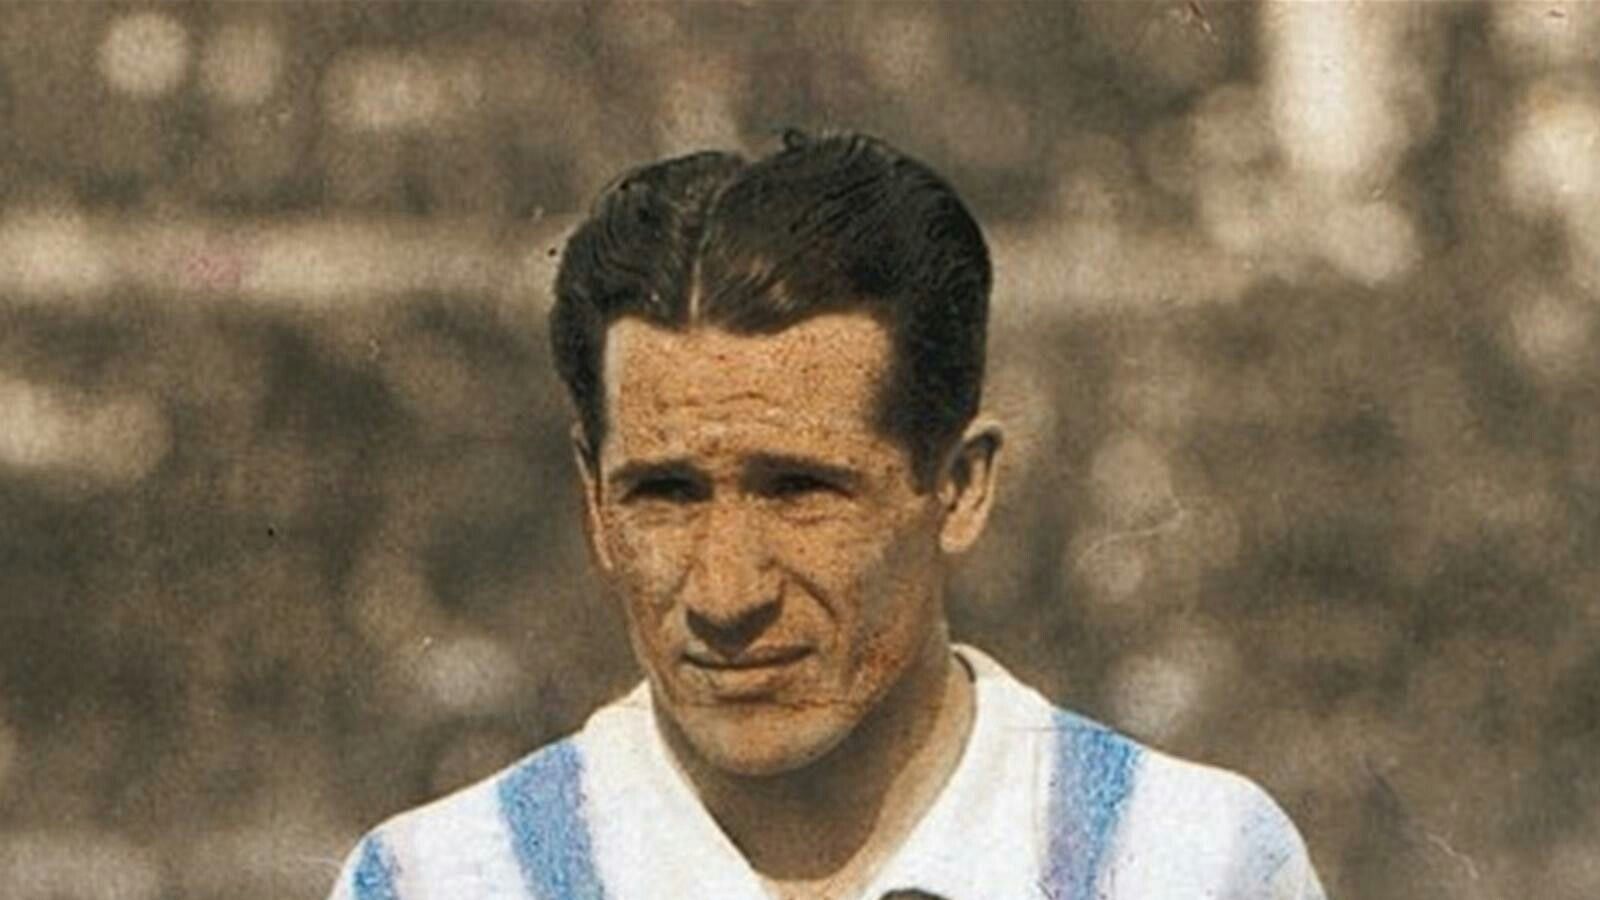 Guillermo Stabile of Argentina